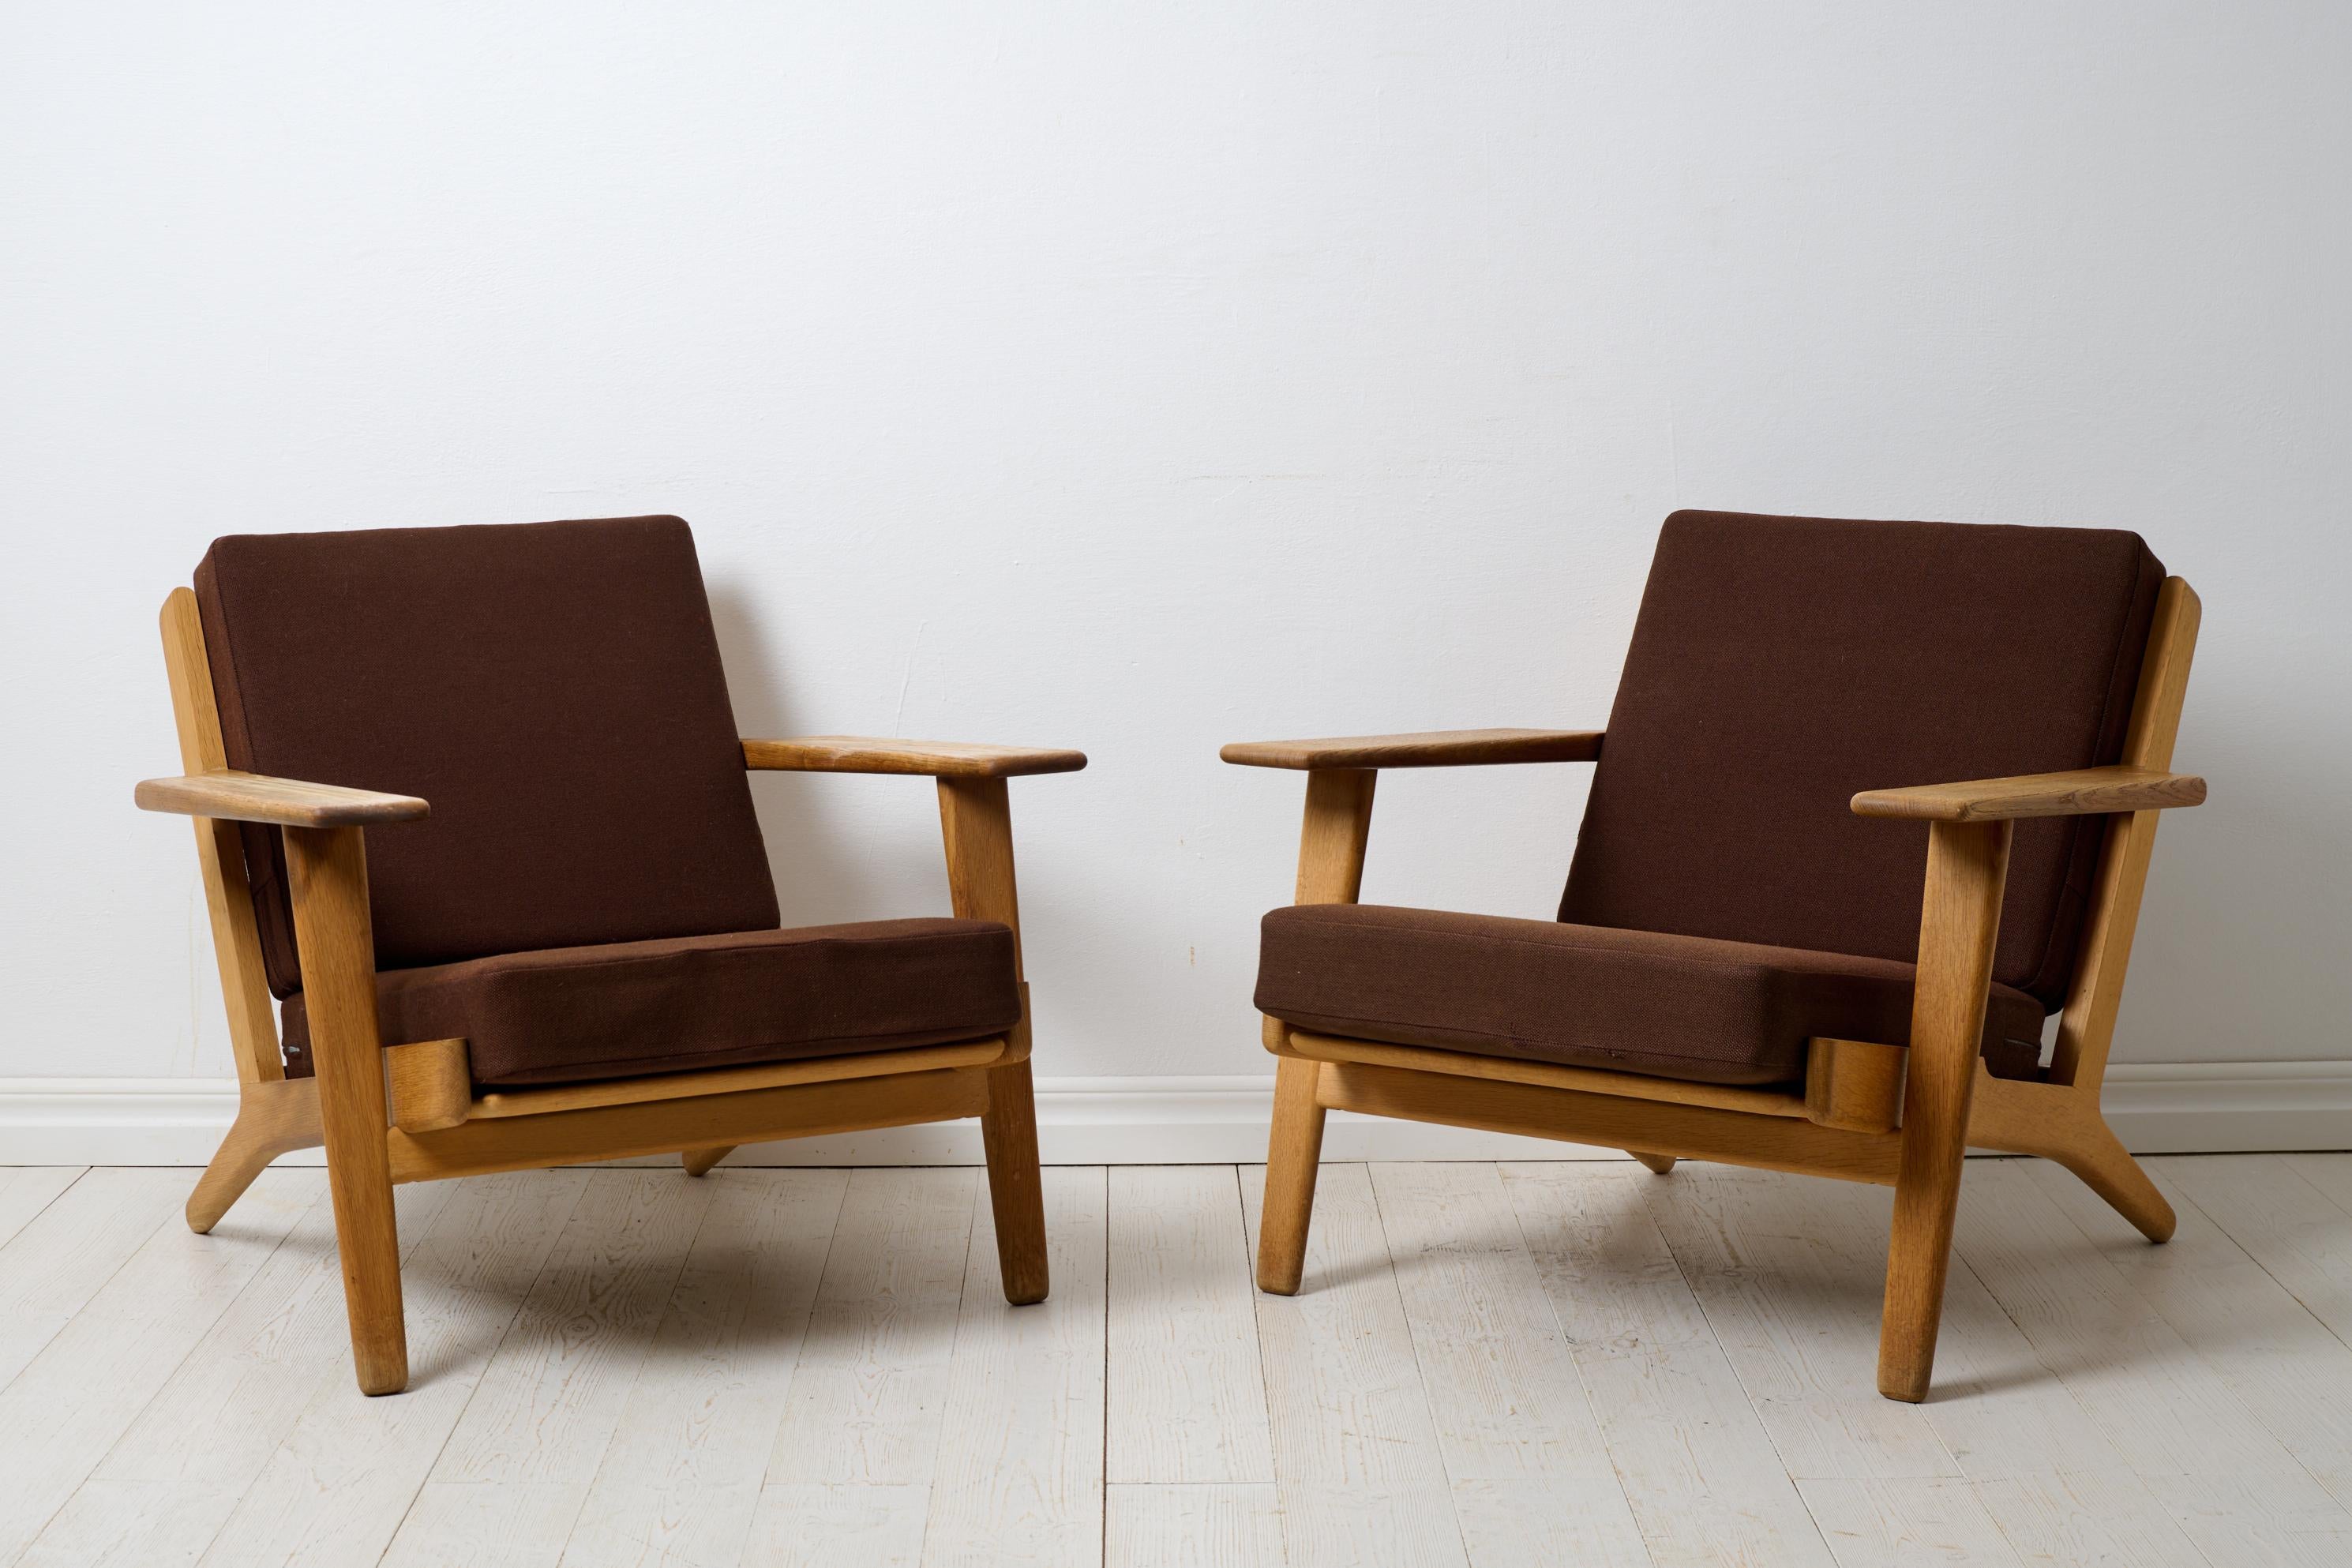 Vintage Hans J. Wegner armchairs model GE-290 for Getama Gedsted, Denmark. The armchairs are a mid century classic by one of the most famous names of the time, Hans J. Wegner (Denmark, 1914-2007). This pair of armchairs are made in oak with loose